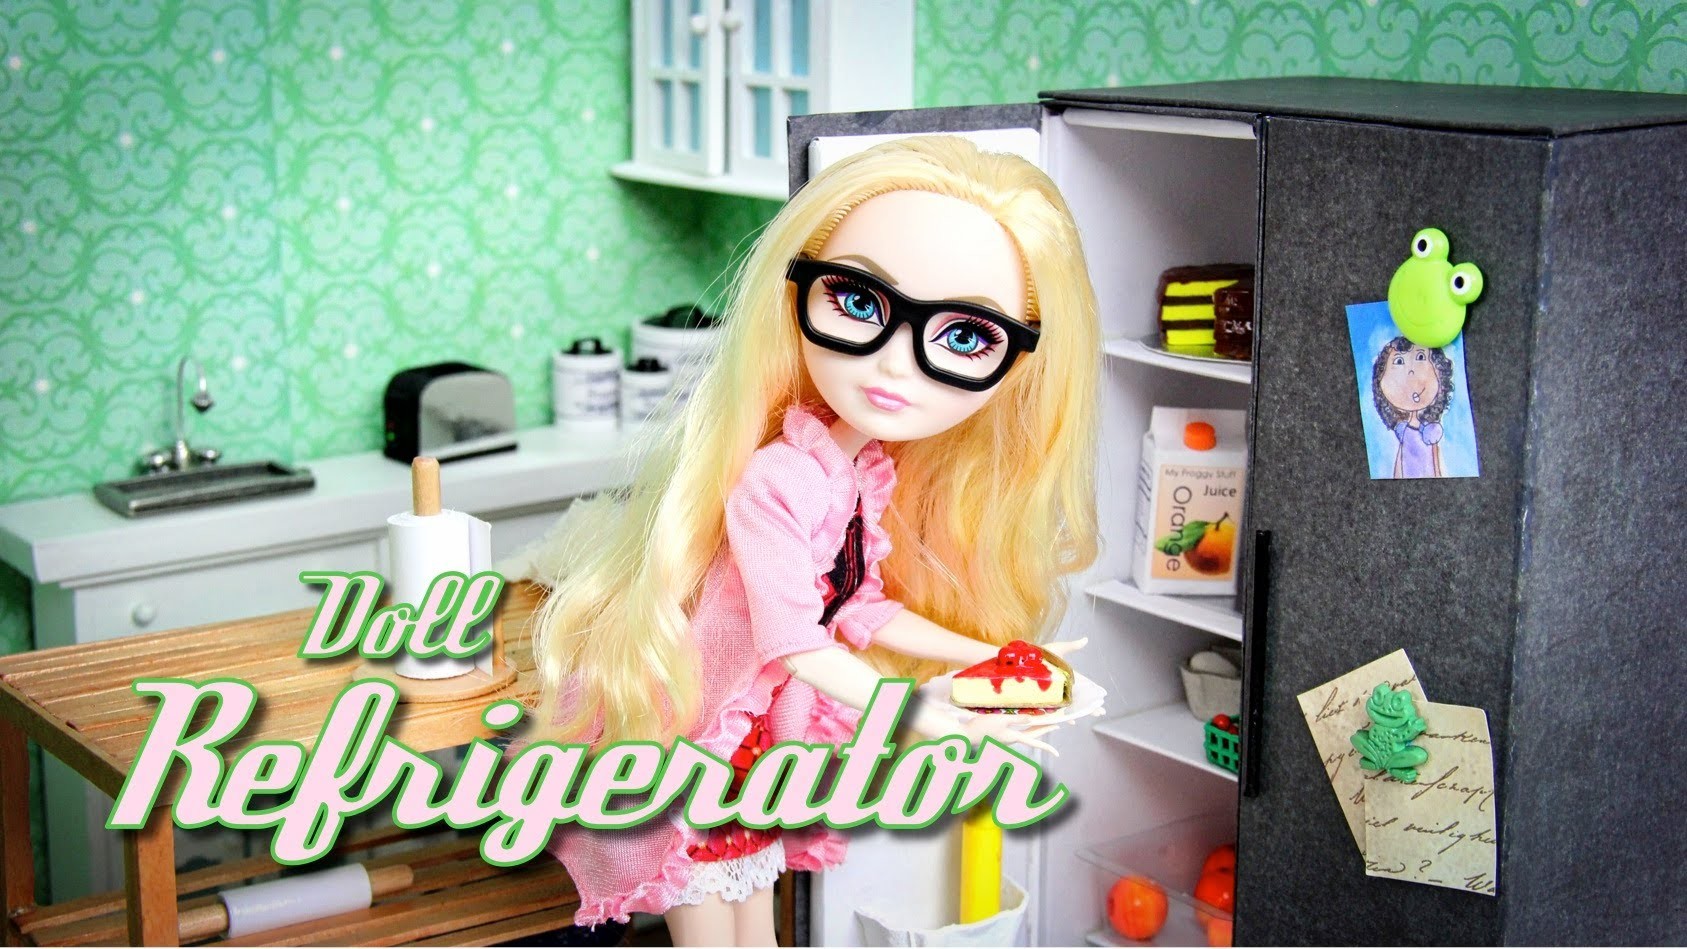 How to Make a Doll Refrigerator - Doll Crafts